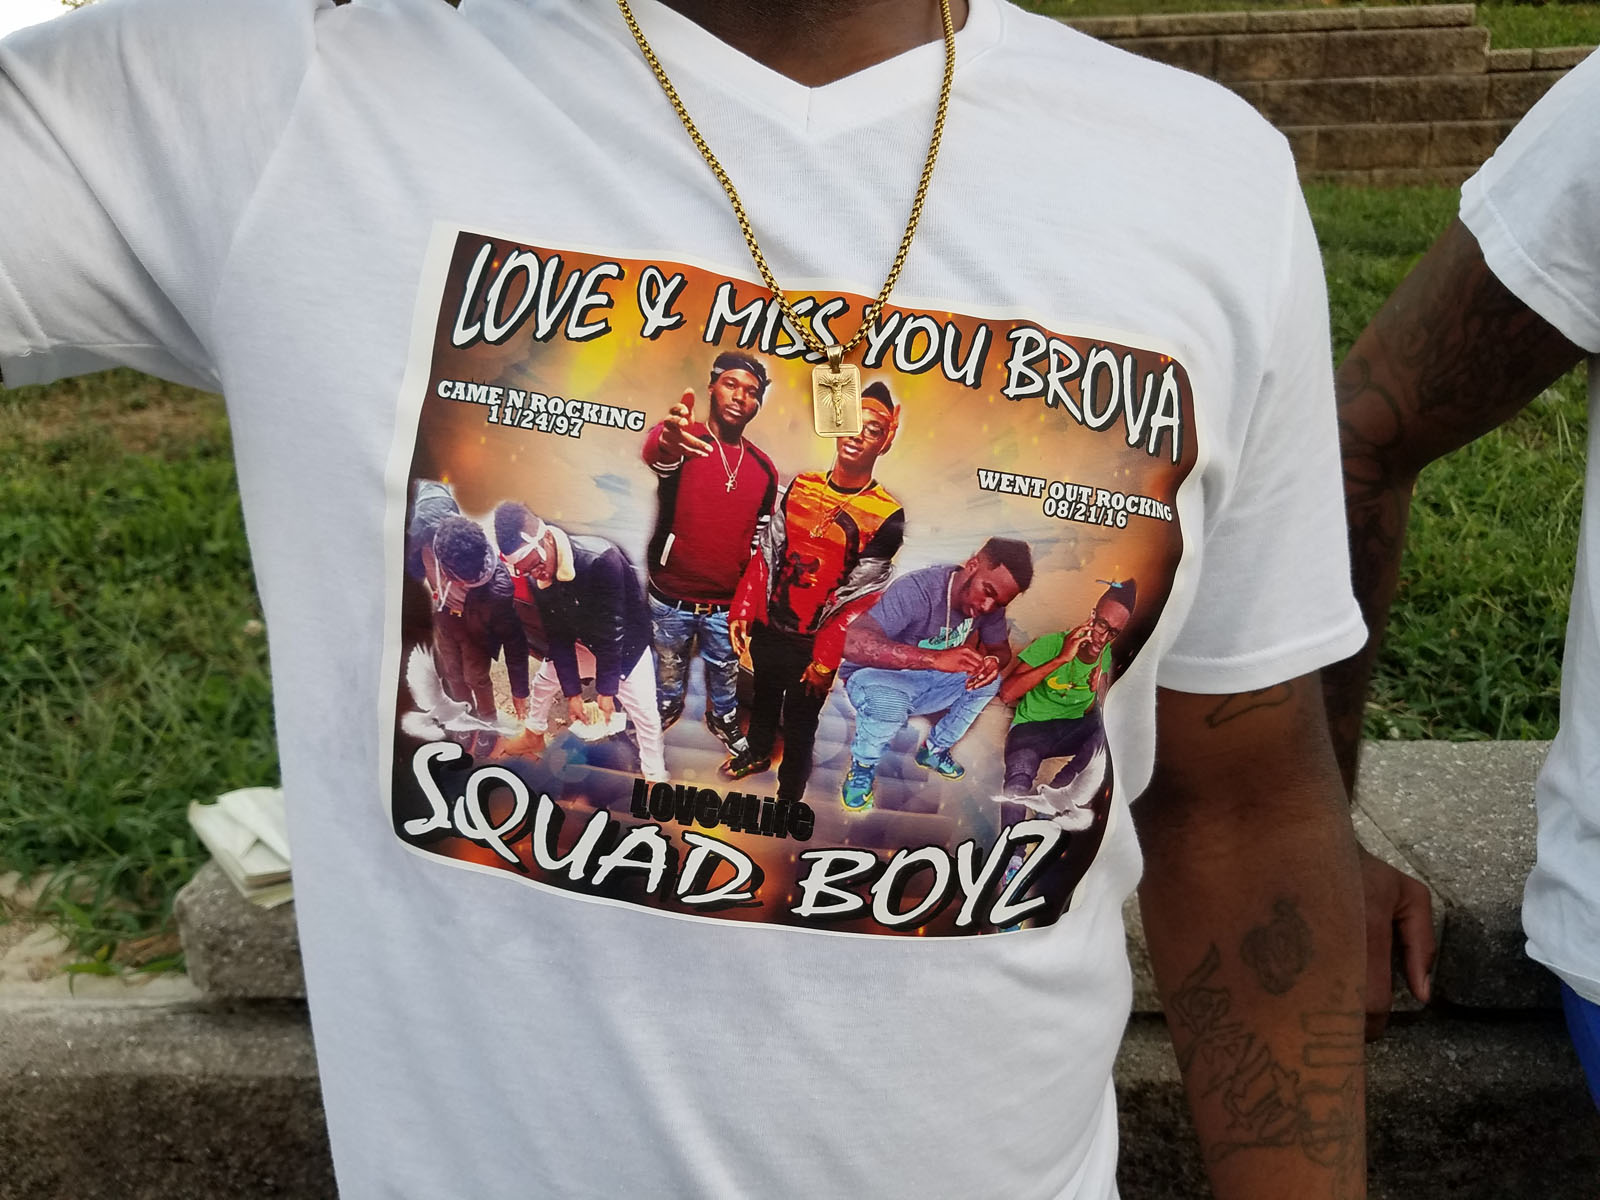 "It just don't seem real," Swipey's brother, Romilli Harris, said. "I be out there looking for him. It's like I'm going crazy or something." (WTOP/Allison Keyes)